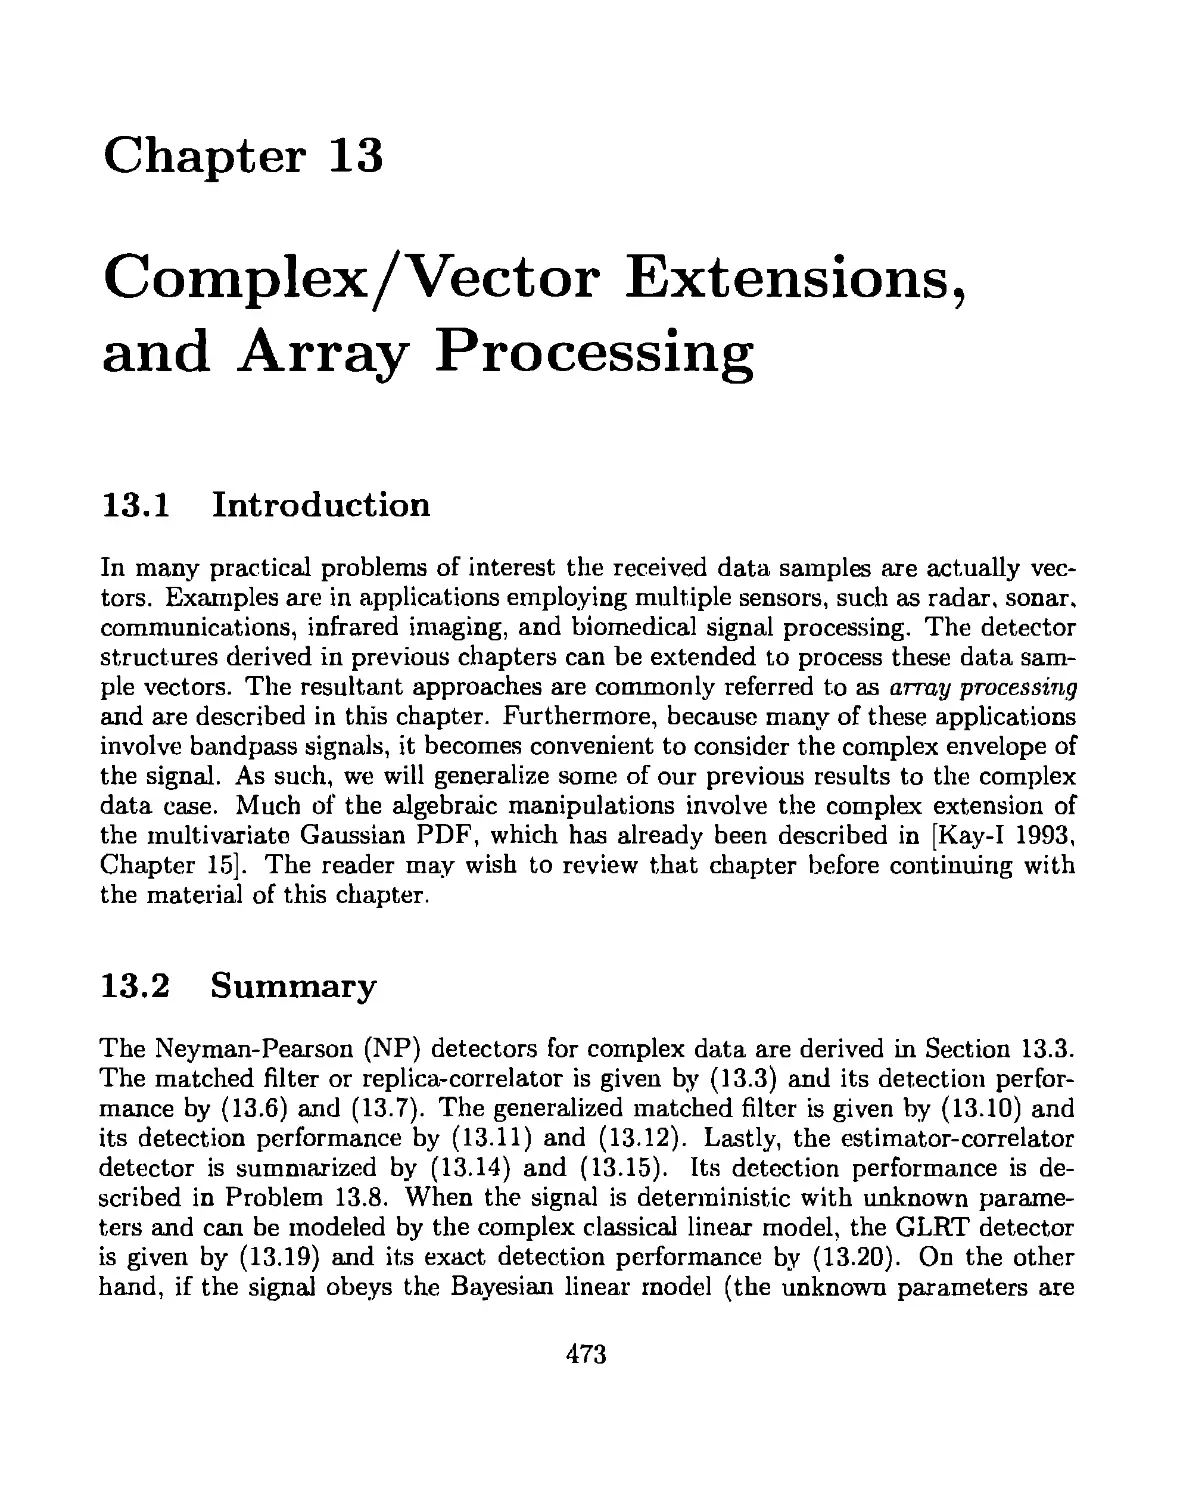 13 Complex/Vector extensions, and array Processing
13.2 Summary